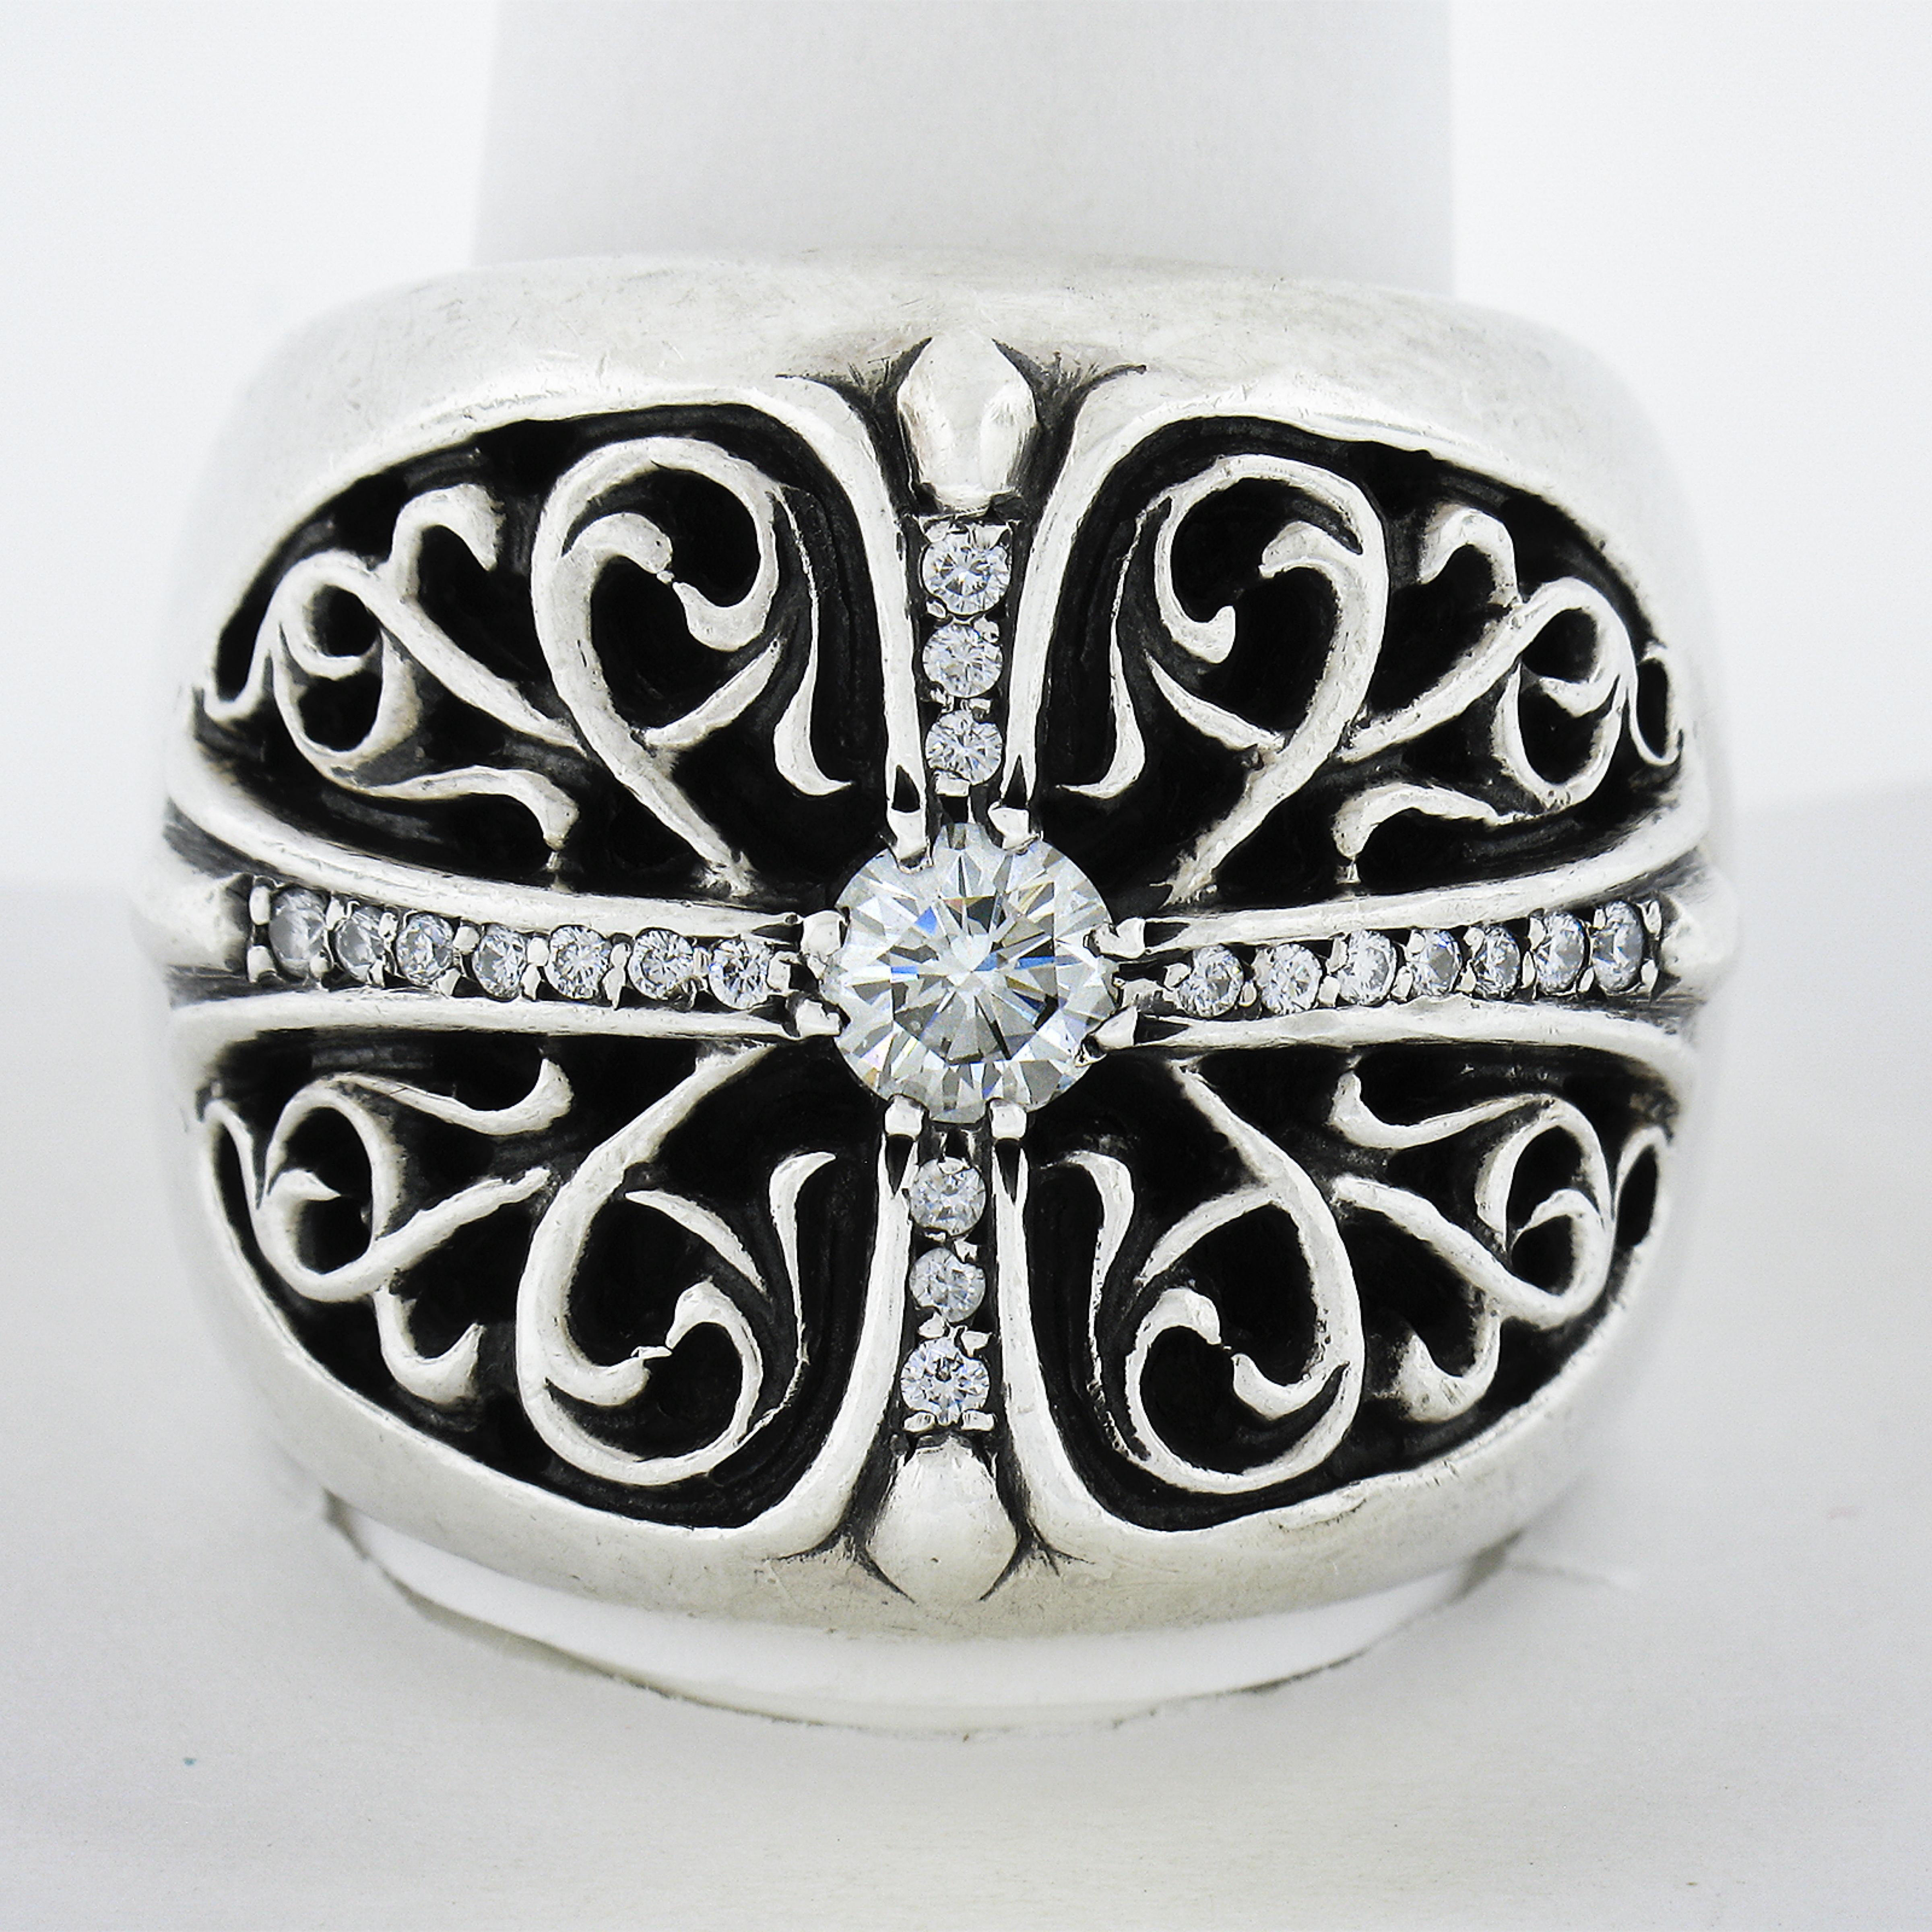 This bold and sharp-looking men's ring by Chrome Hearts is solidly crafted in sterling silver and and features a wide design with detailed scroll open work and is adorned with 0.77 carats of truly fine quality diamonds throughout. The center diamond